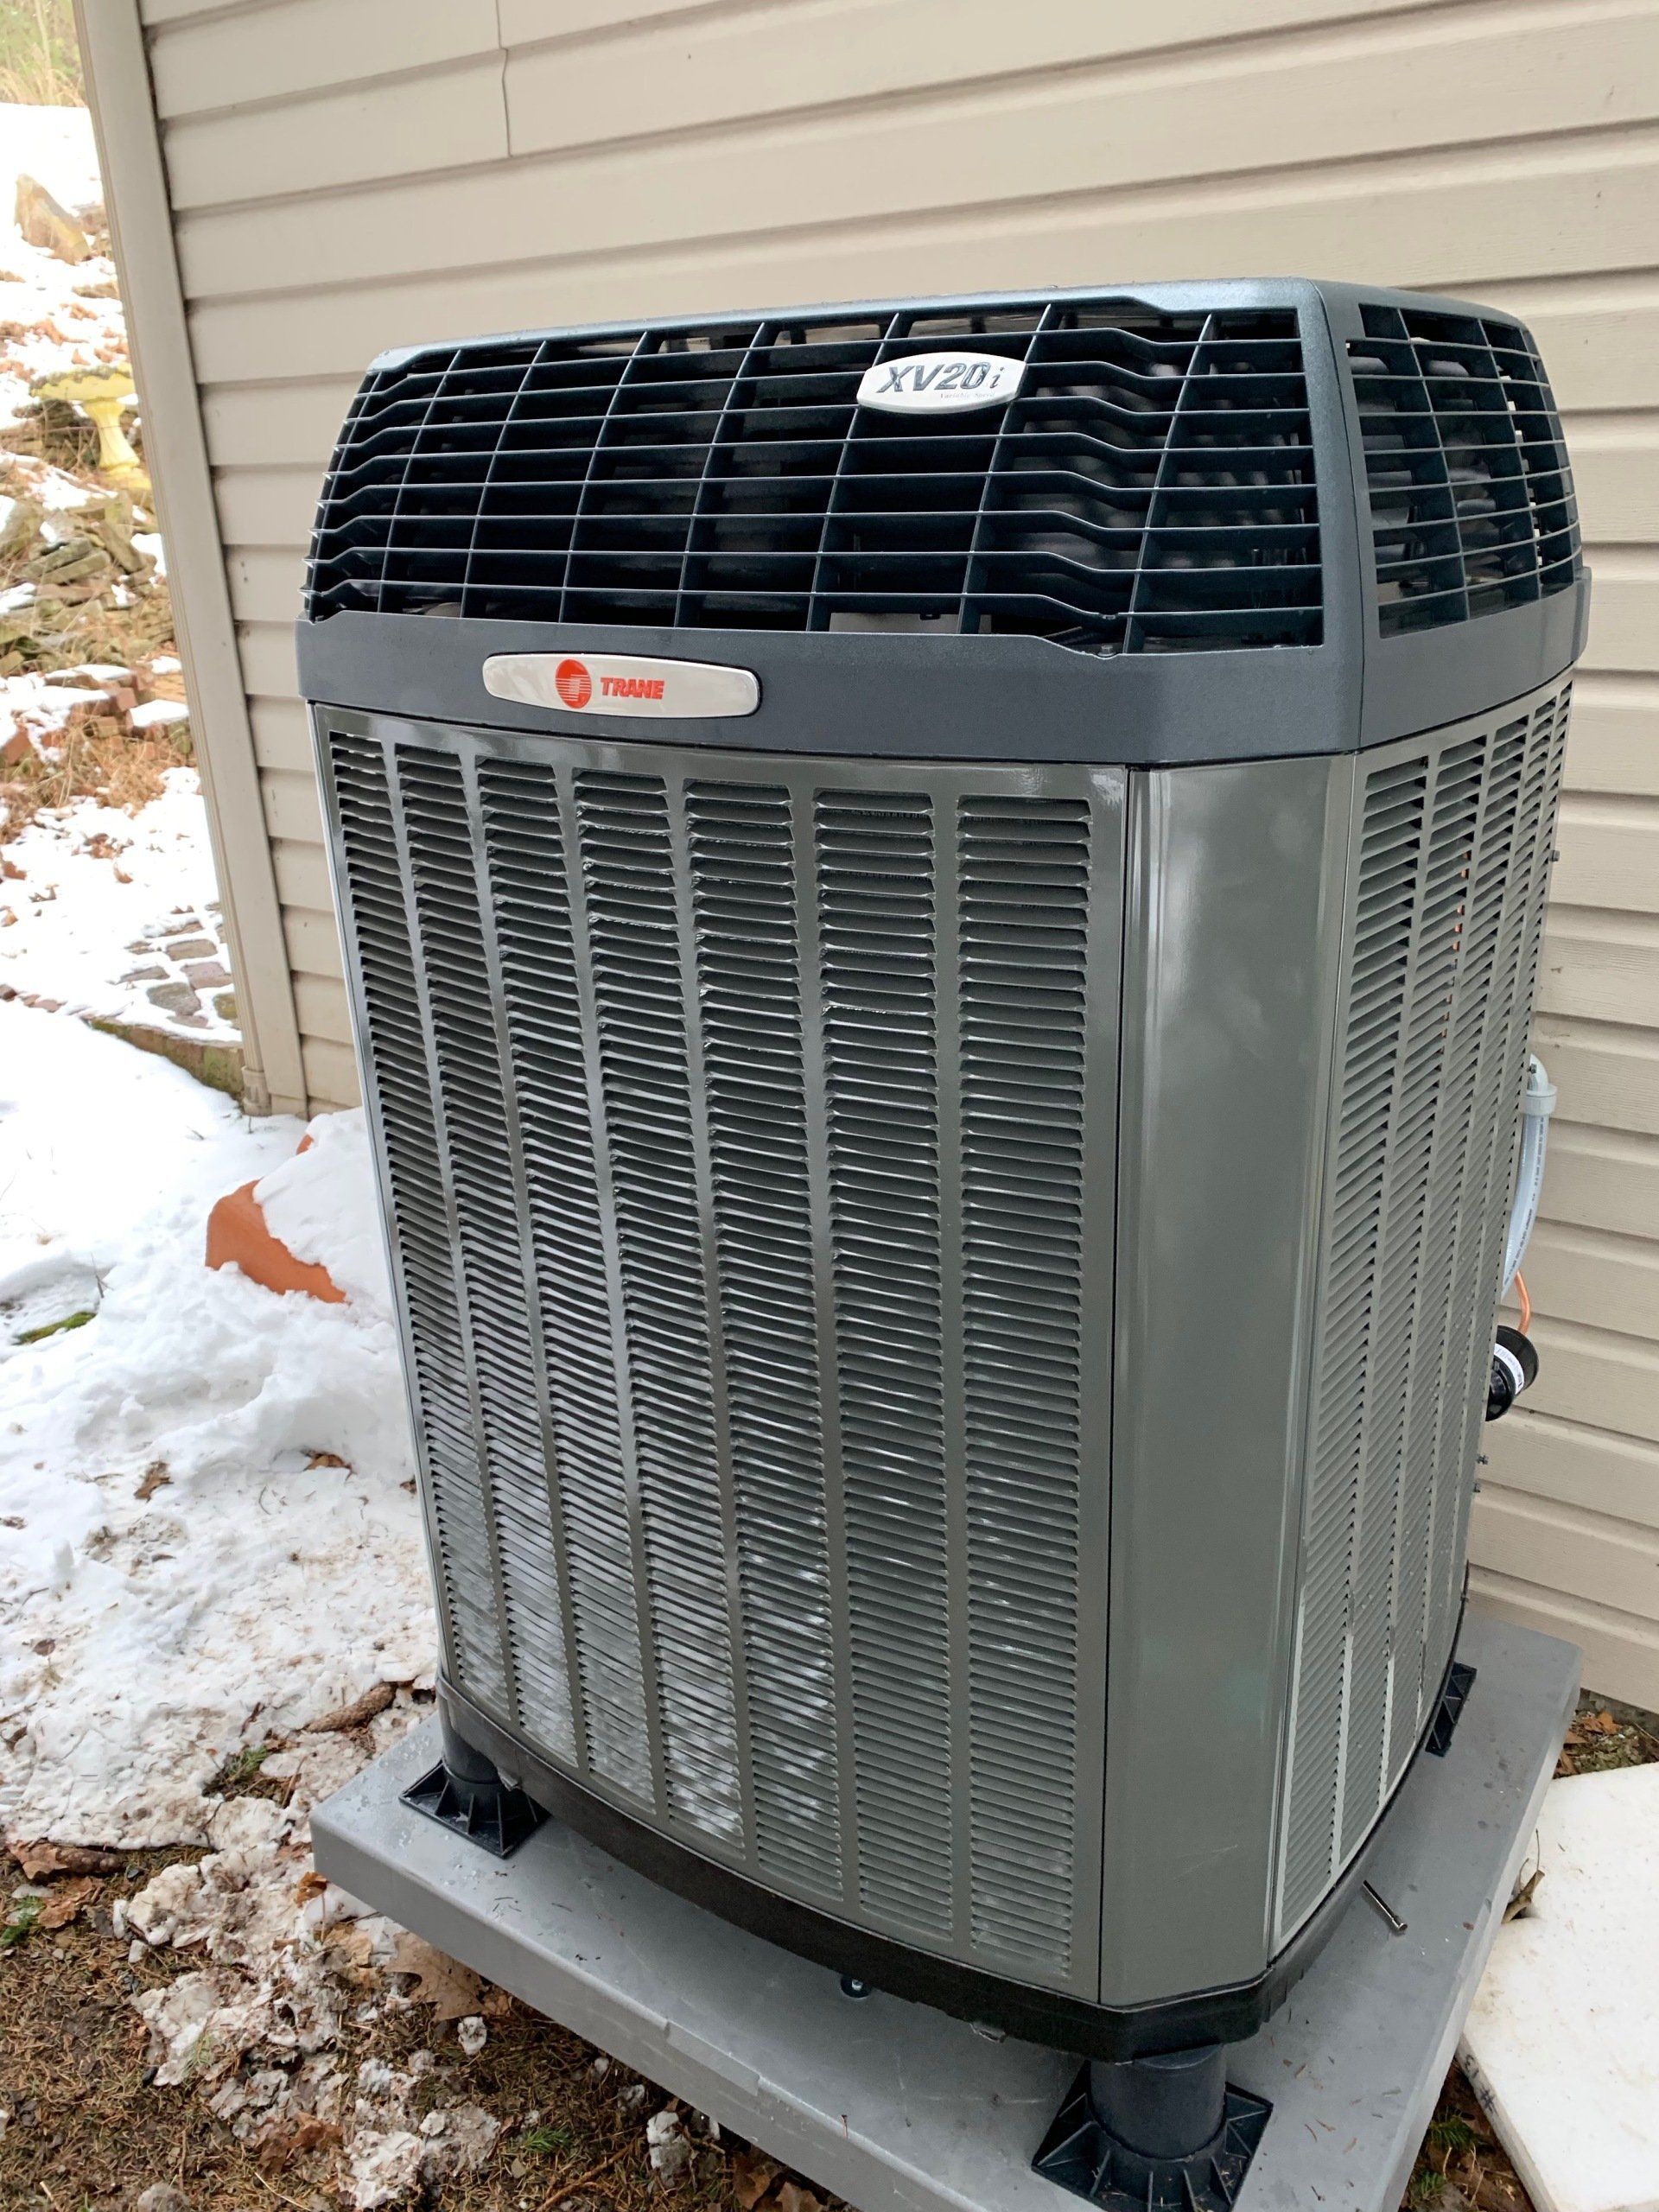 HVAC Units - Plumbing, Heating and Air Conditioning in Blairsville, PA